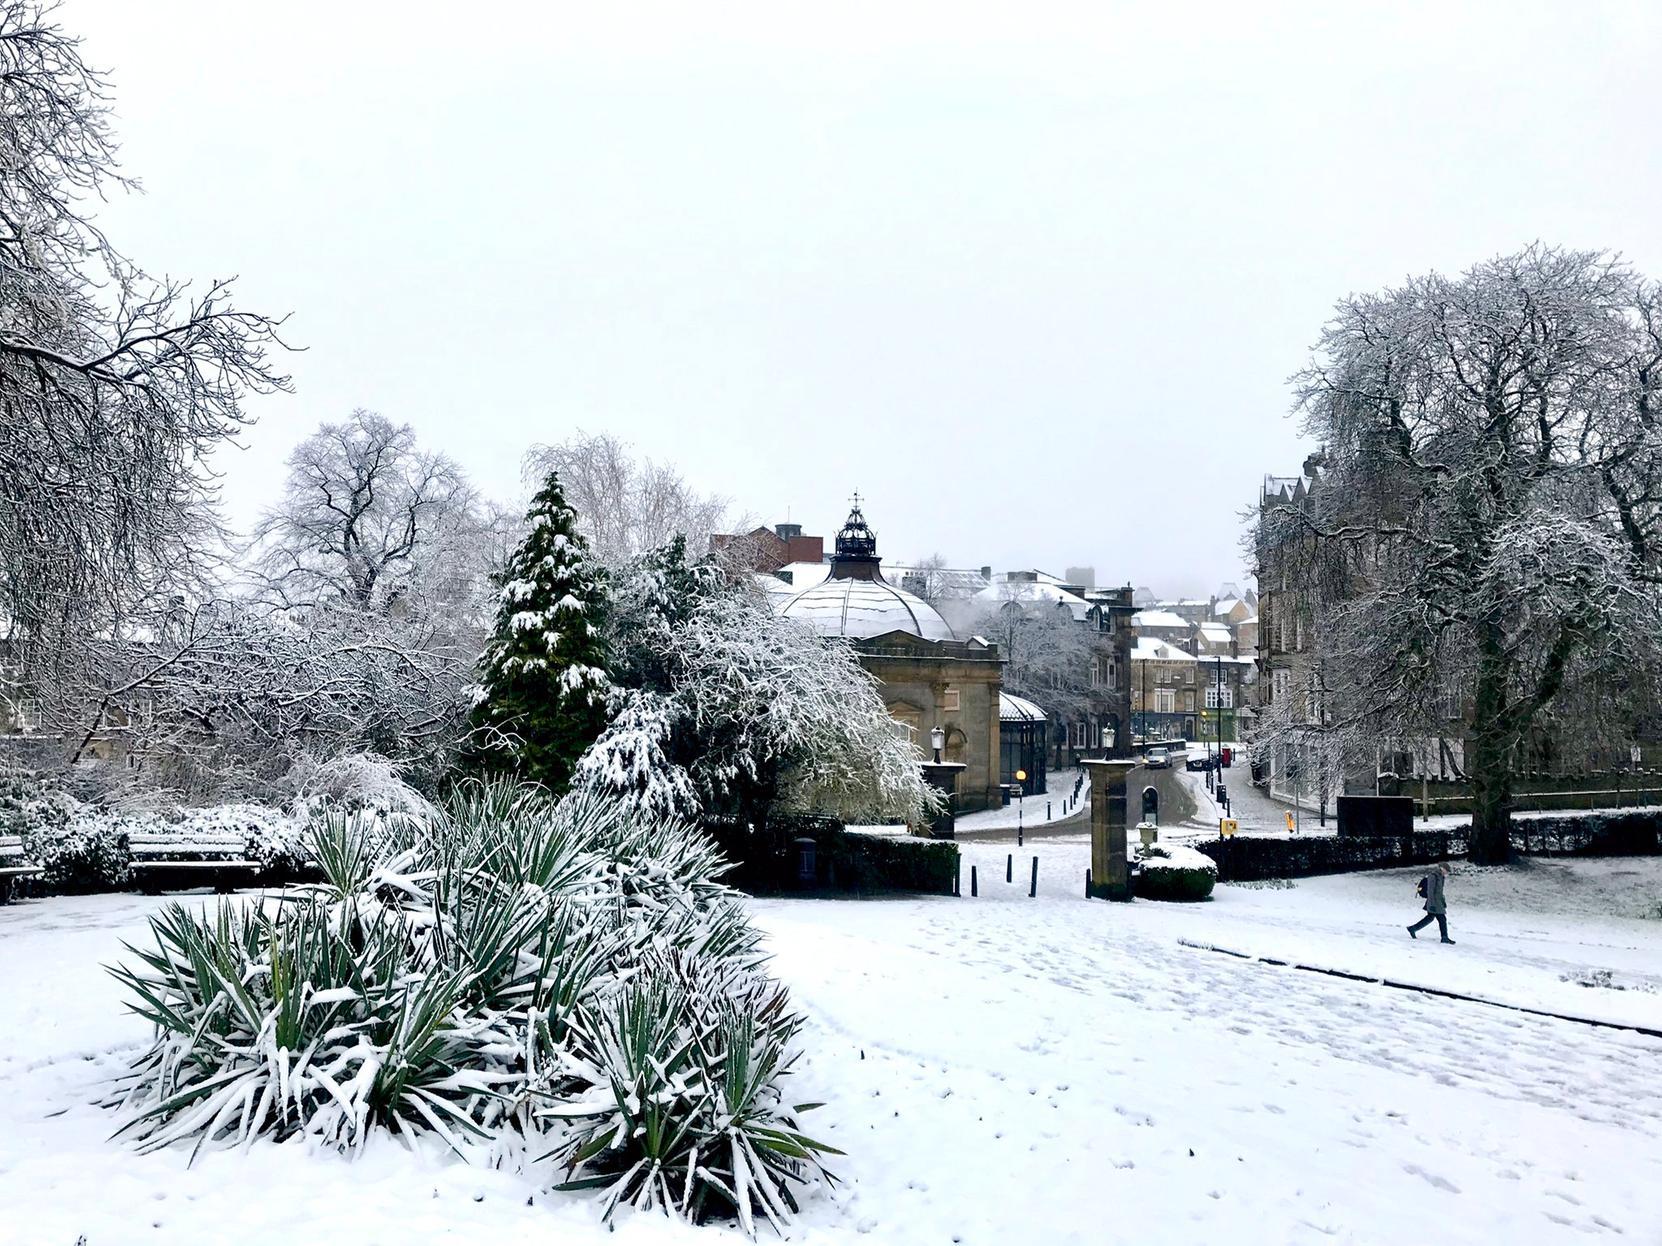 Wintry scenes at Valley Gardens this morning.